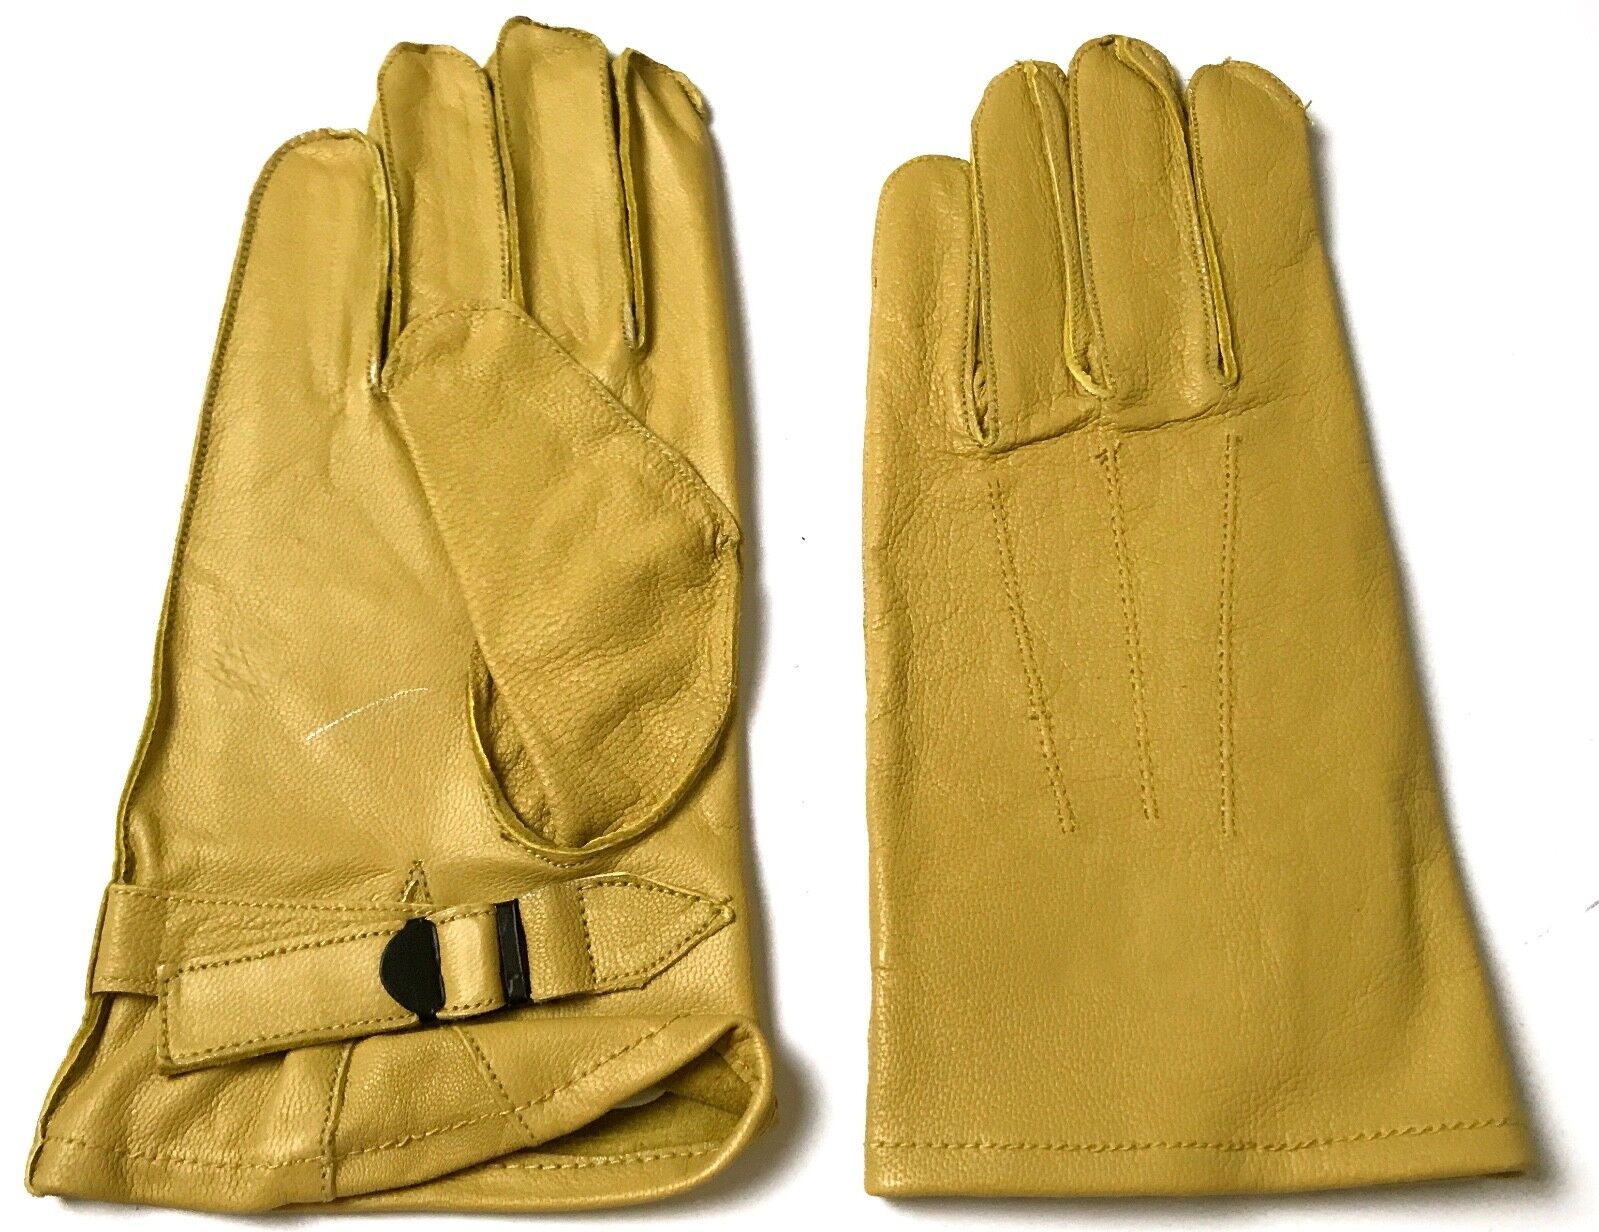  WWII US ARMY SHERMAN TANK TANKER LEATHER WORK GLOVES-SIZE 2XLARGE